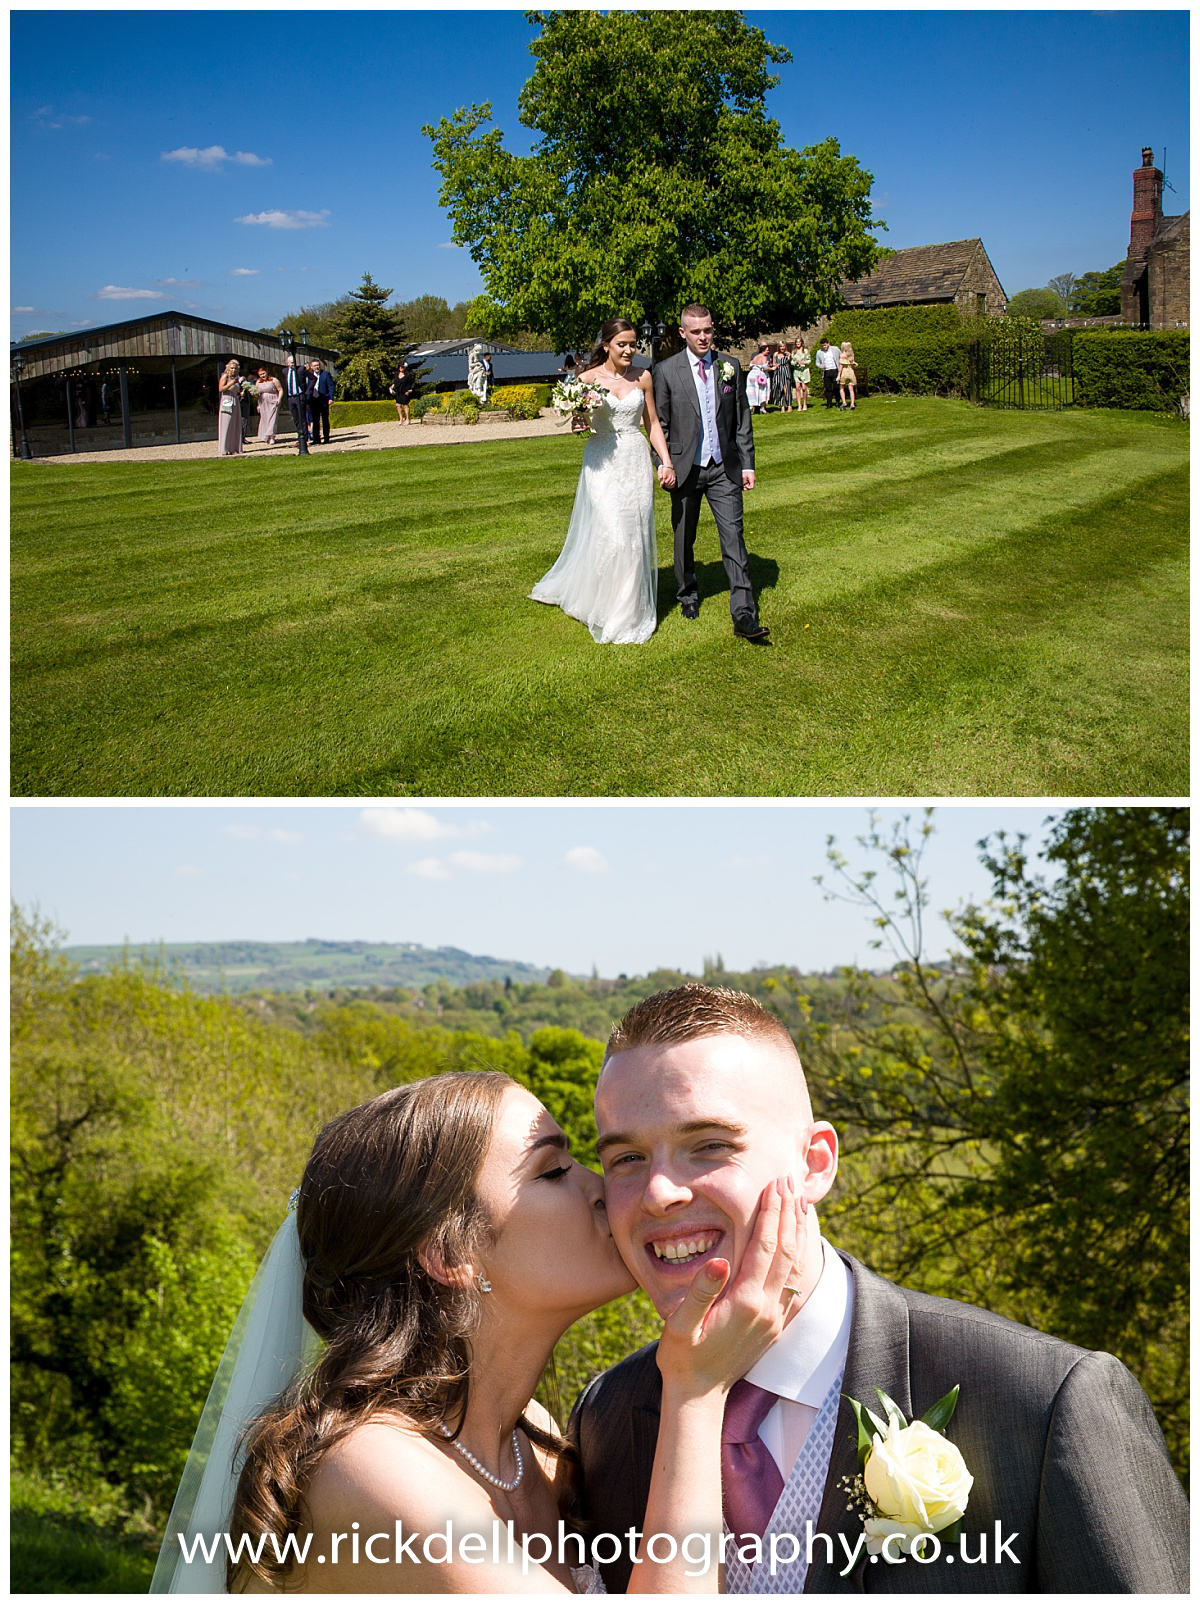 Wedding Photography Manchester - Tamsyn and Jamie's Hyde Bank Farm Wedding Day 51